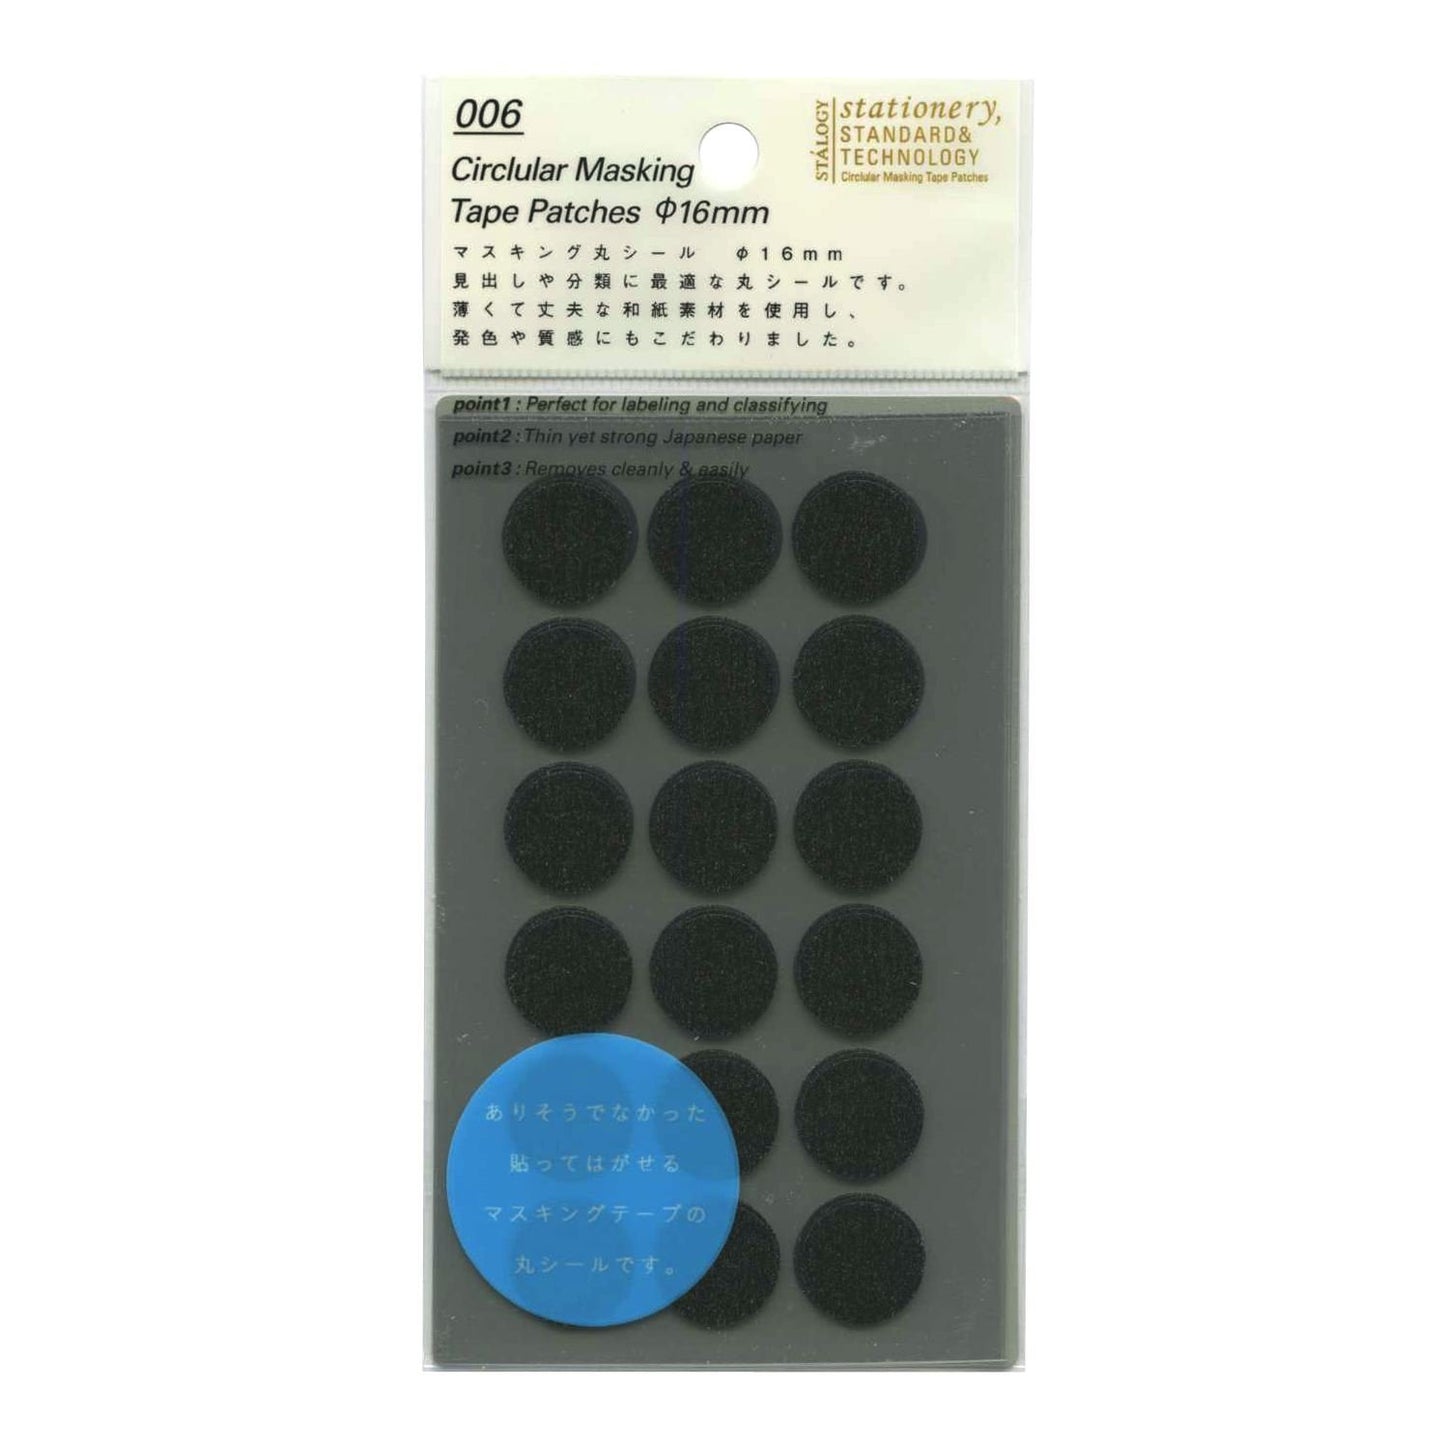 Black Circular Masking Tape Patches. The circular masking patches are made from thin, yet strong Japanese paper, perfect for labelling and classifying. Durable Writeable.